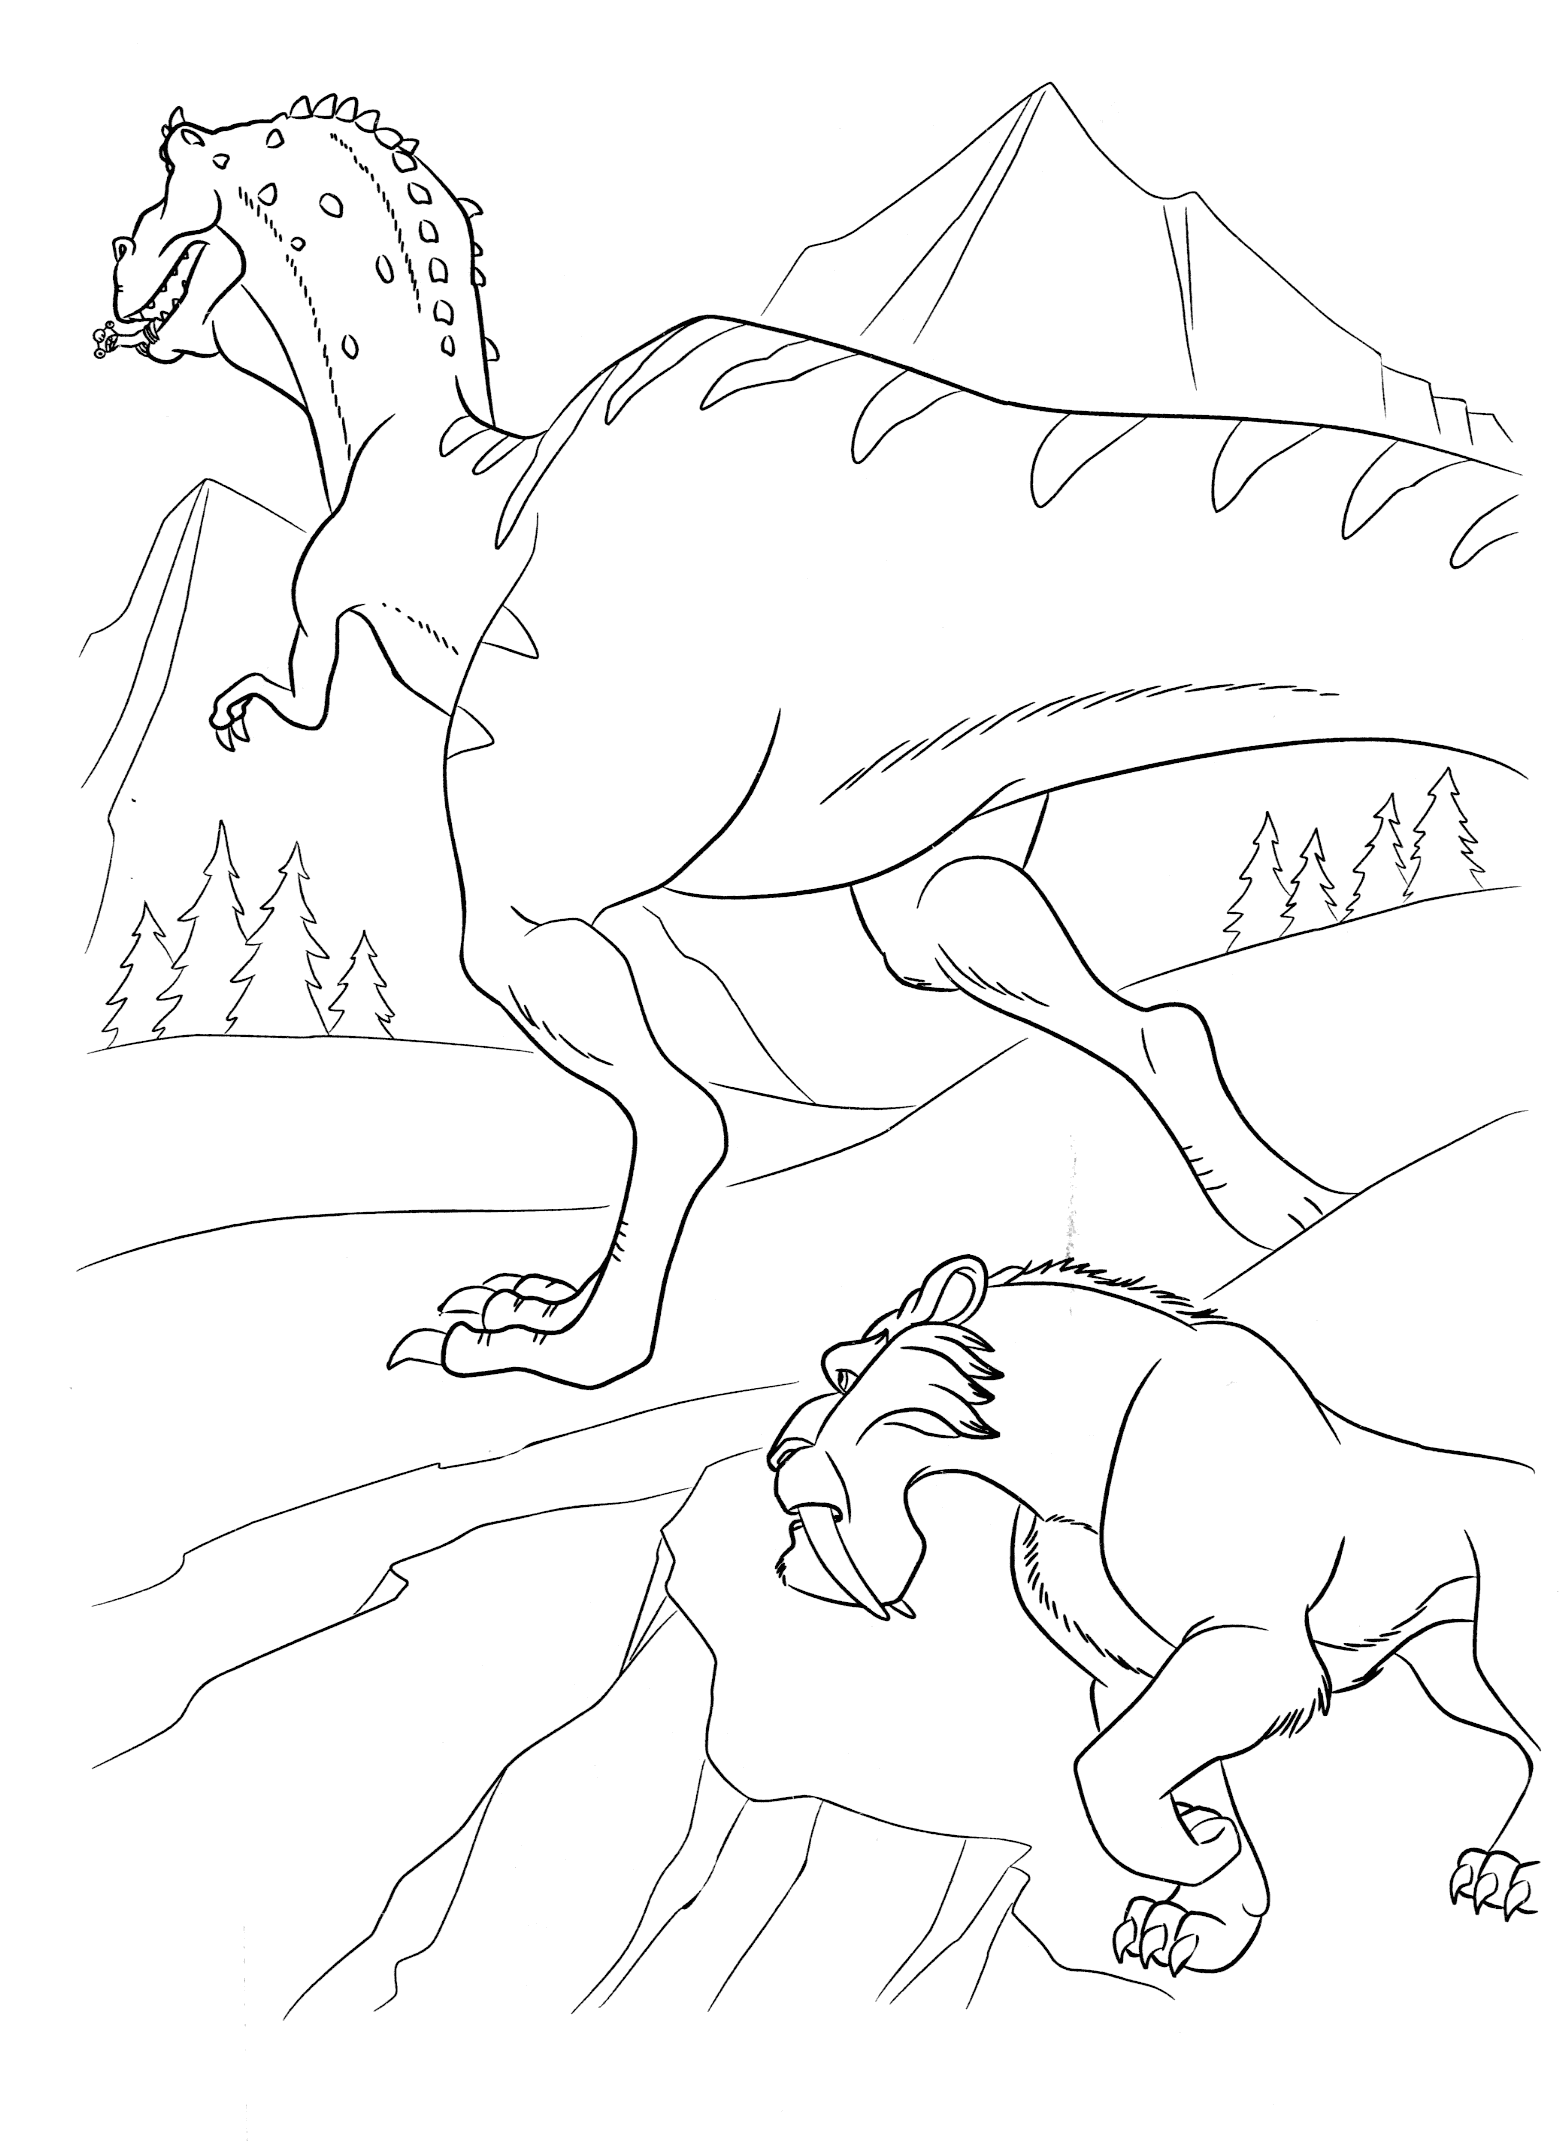 ice age coloring pages diego luna - photo #27